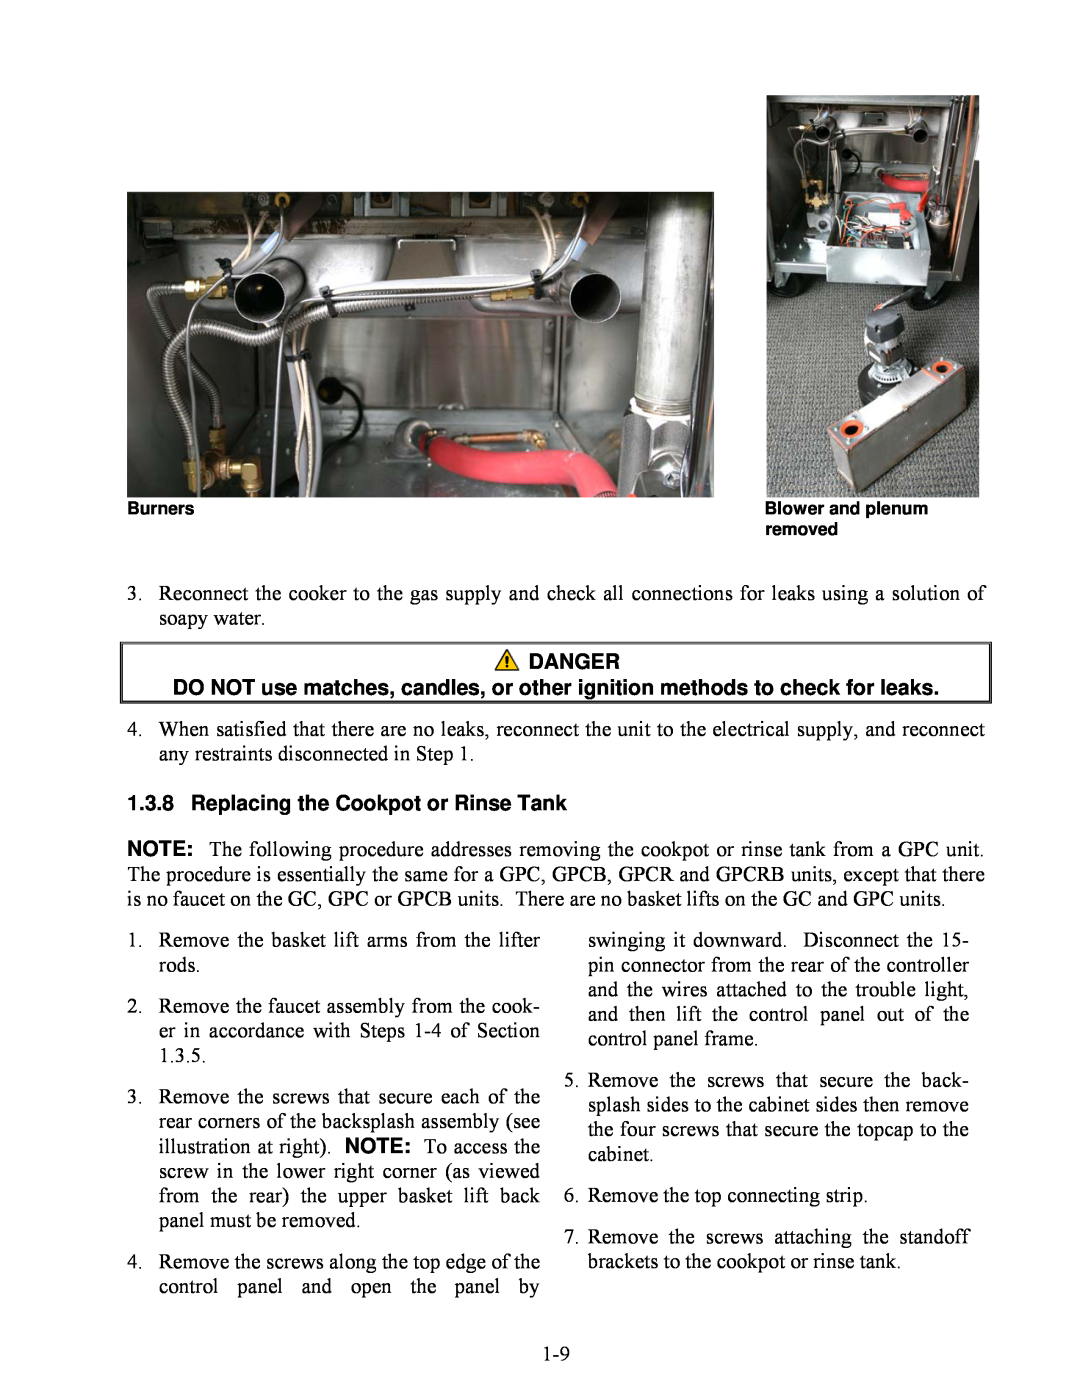 Frymaster 8196692 manual Danger, Replacing the Cookpot or Rinse Tank 